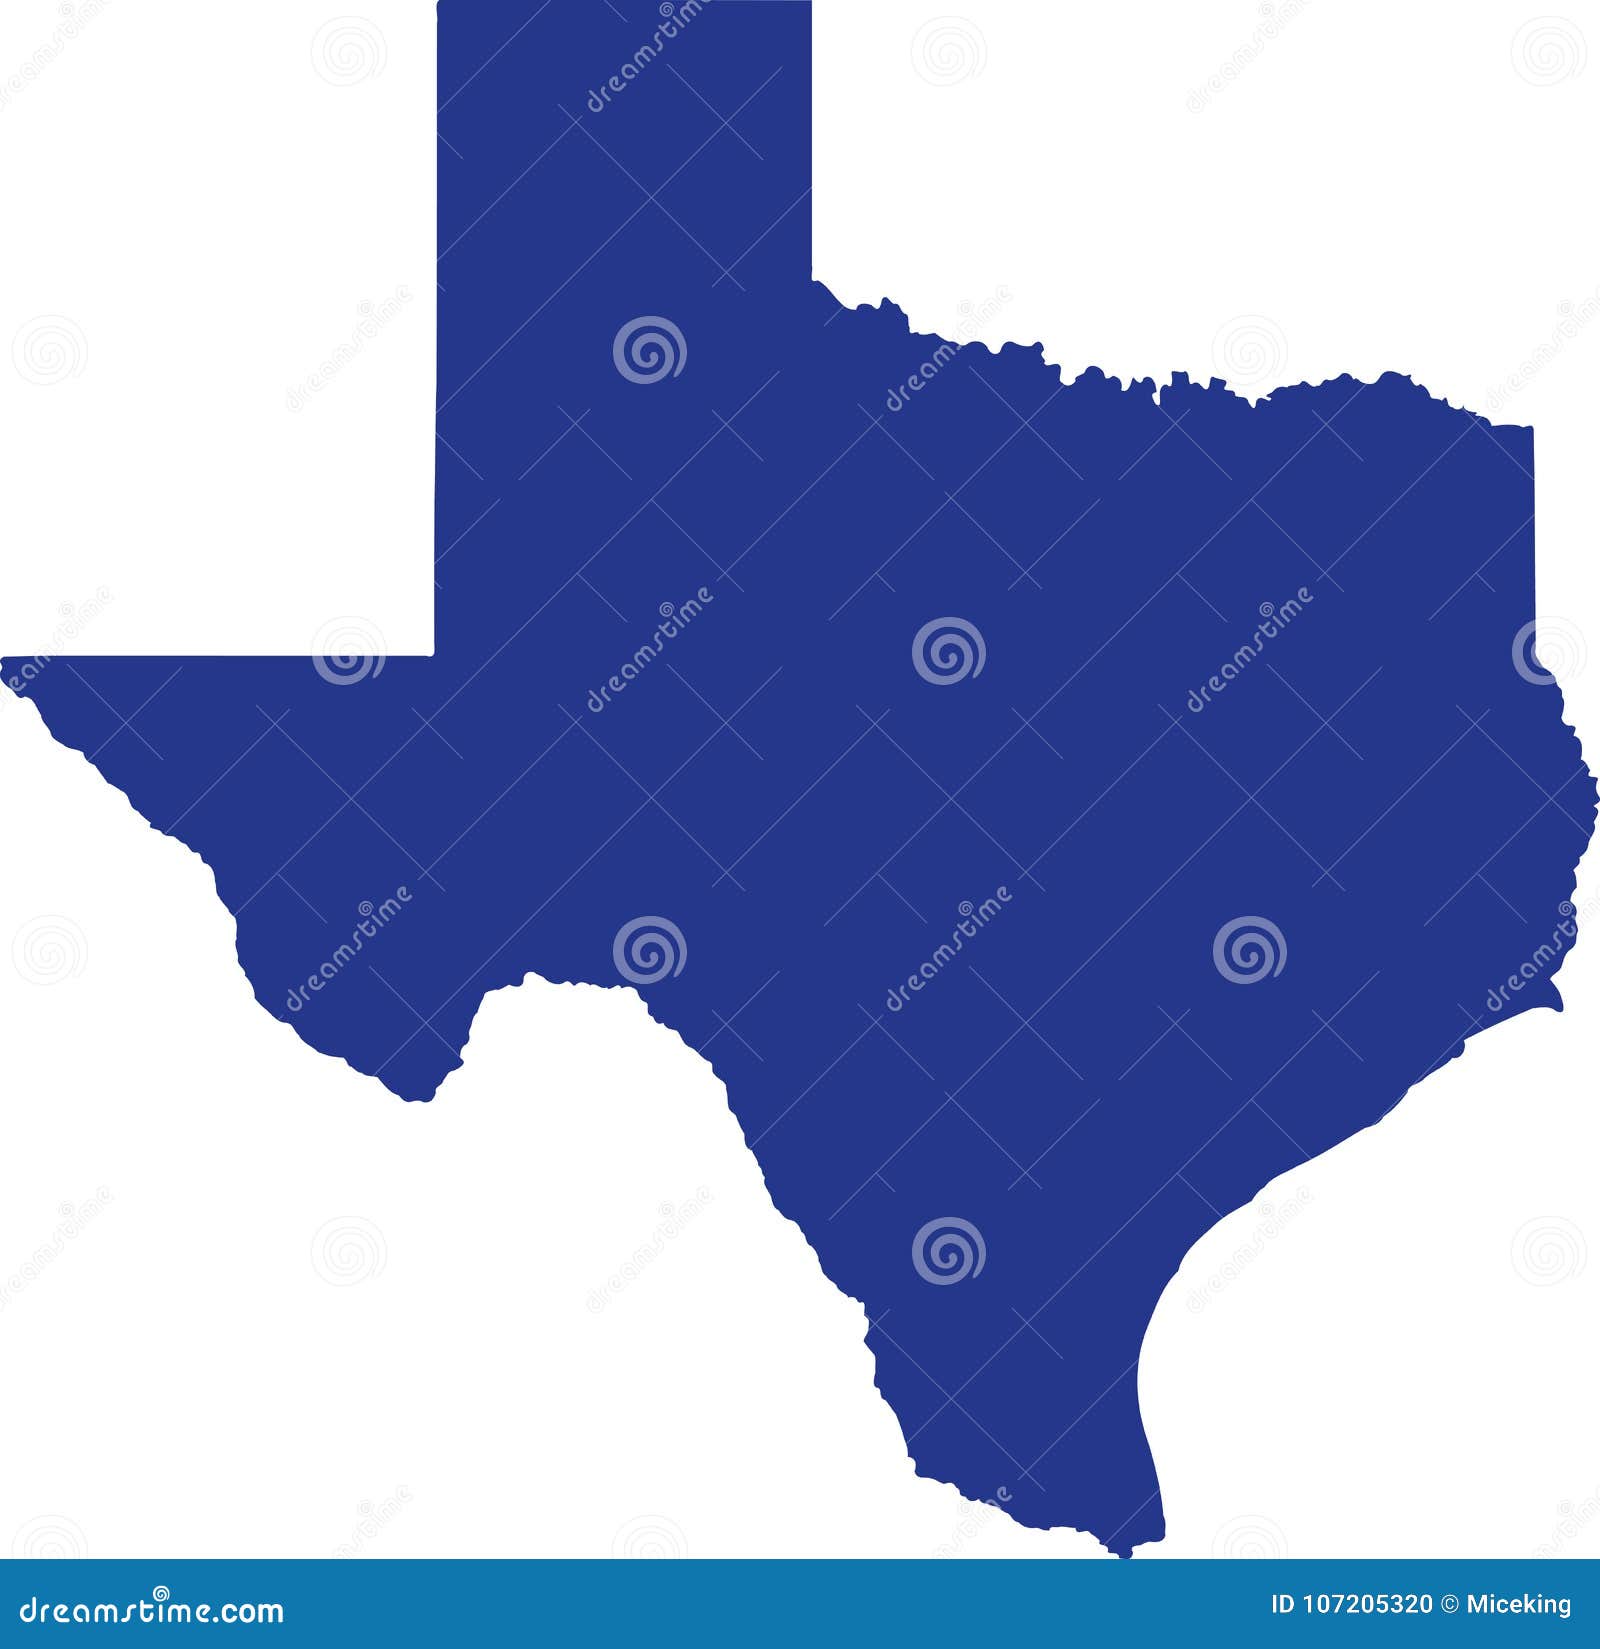 texas state map